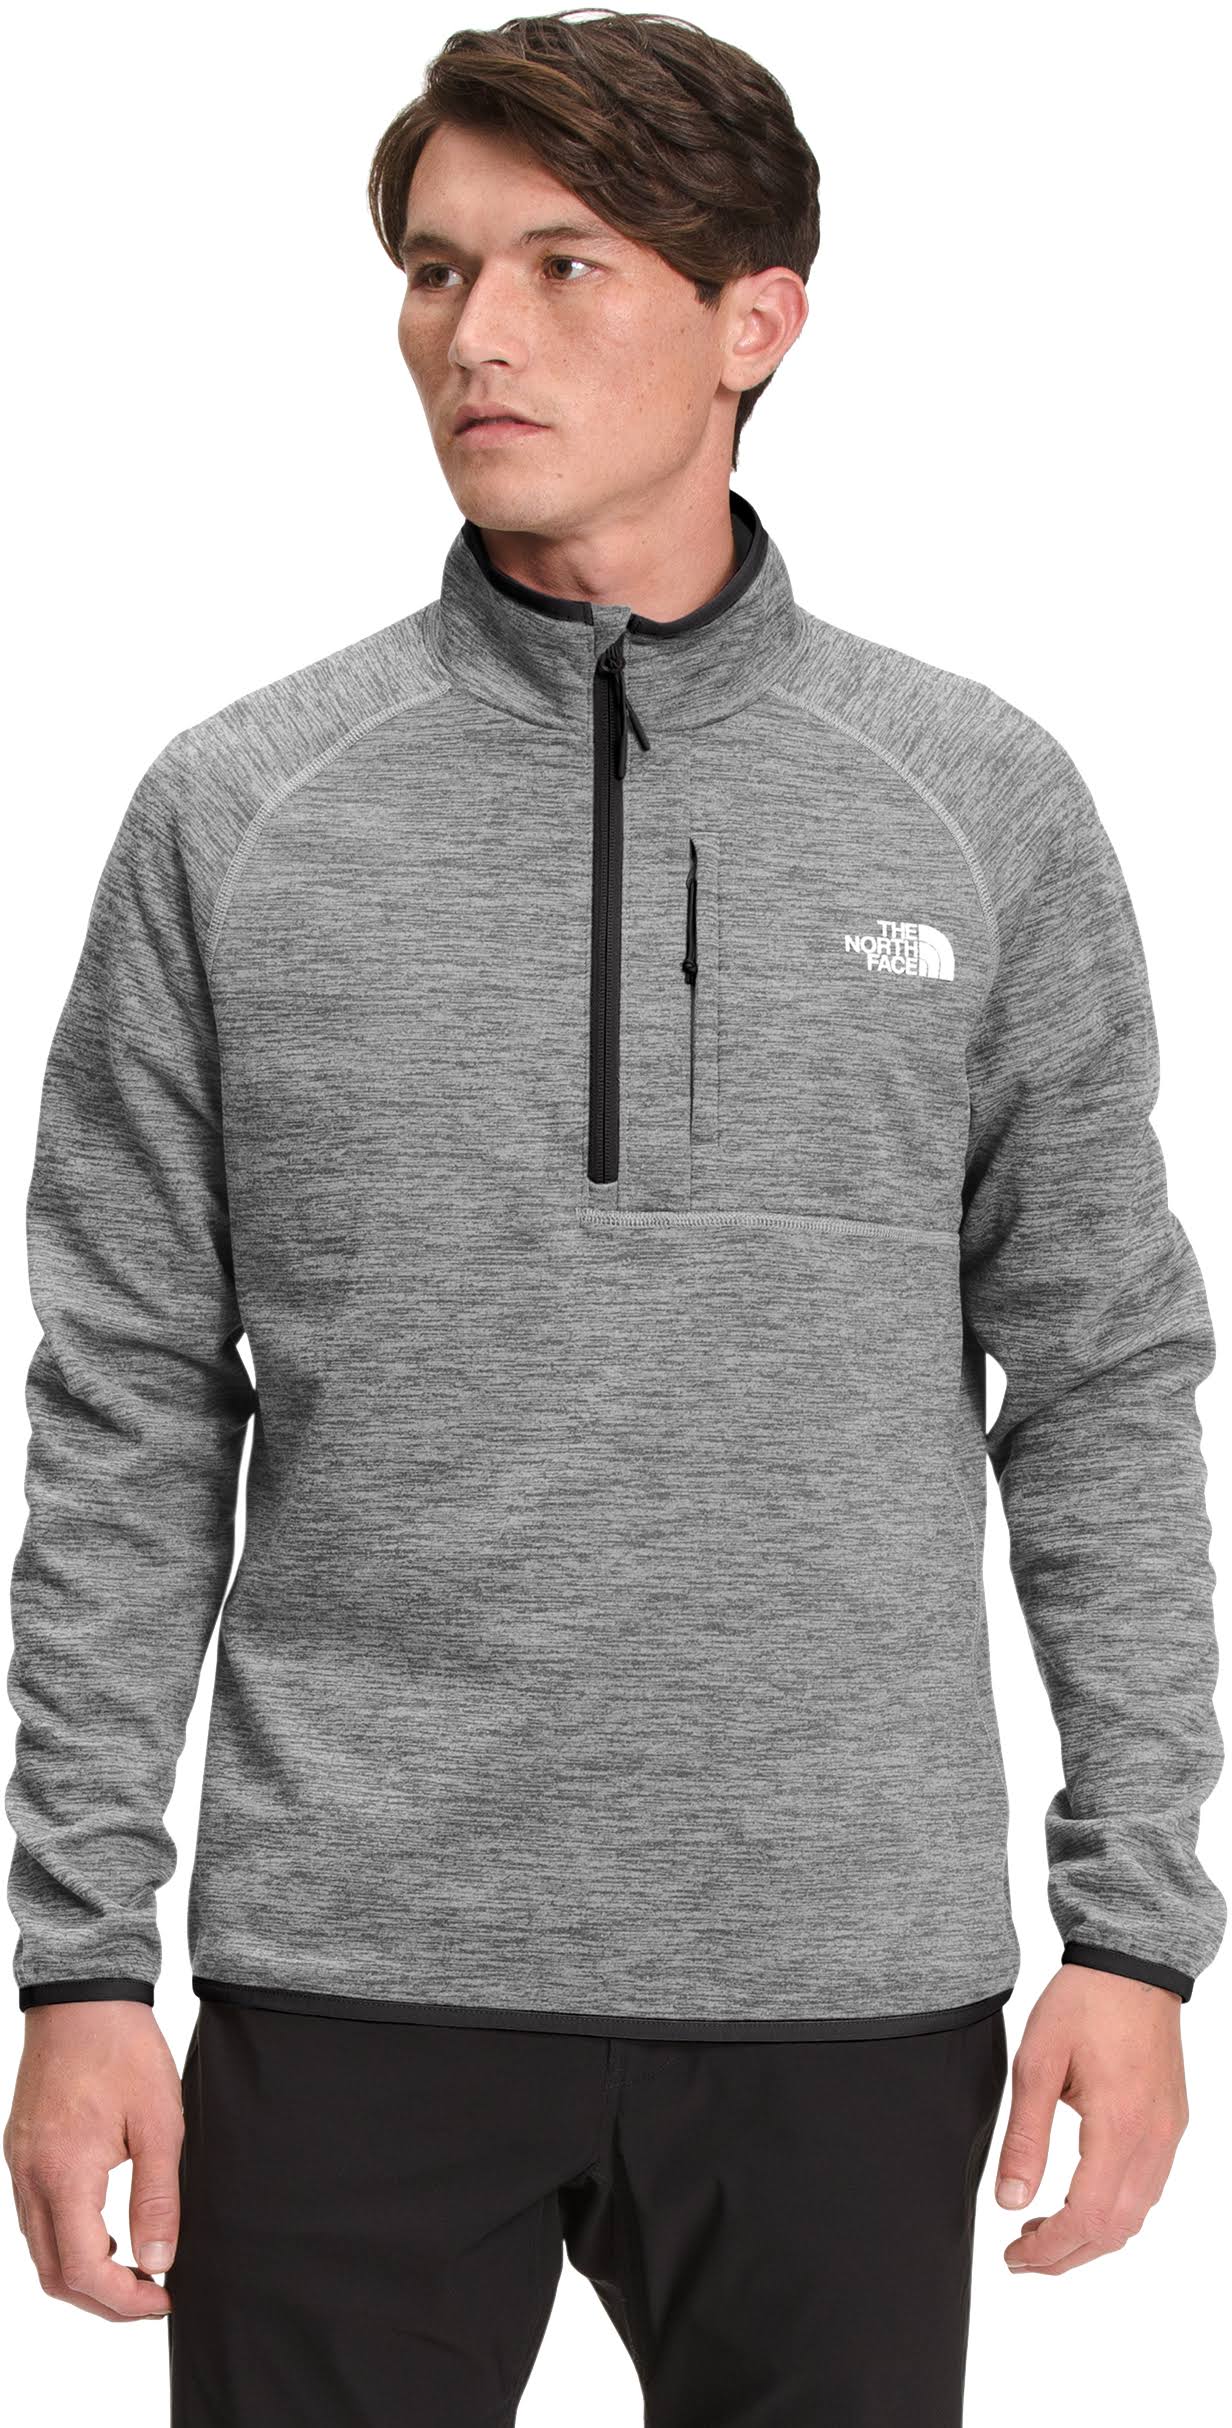 The North Face Canyonlands 1/2 Zip - Grey - Size L - Men